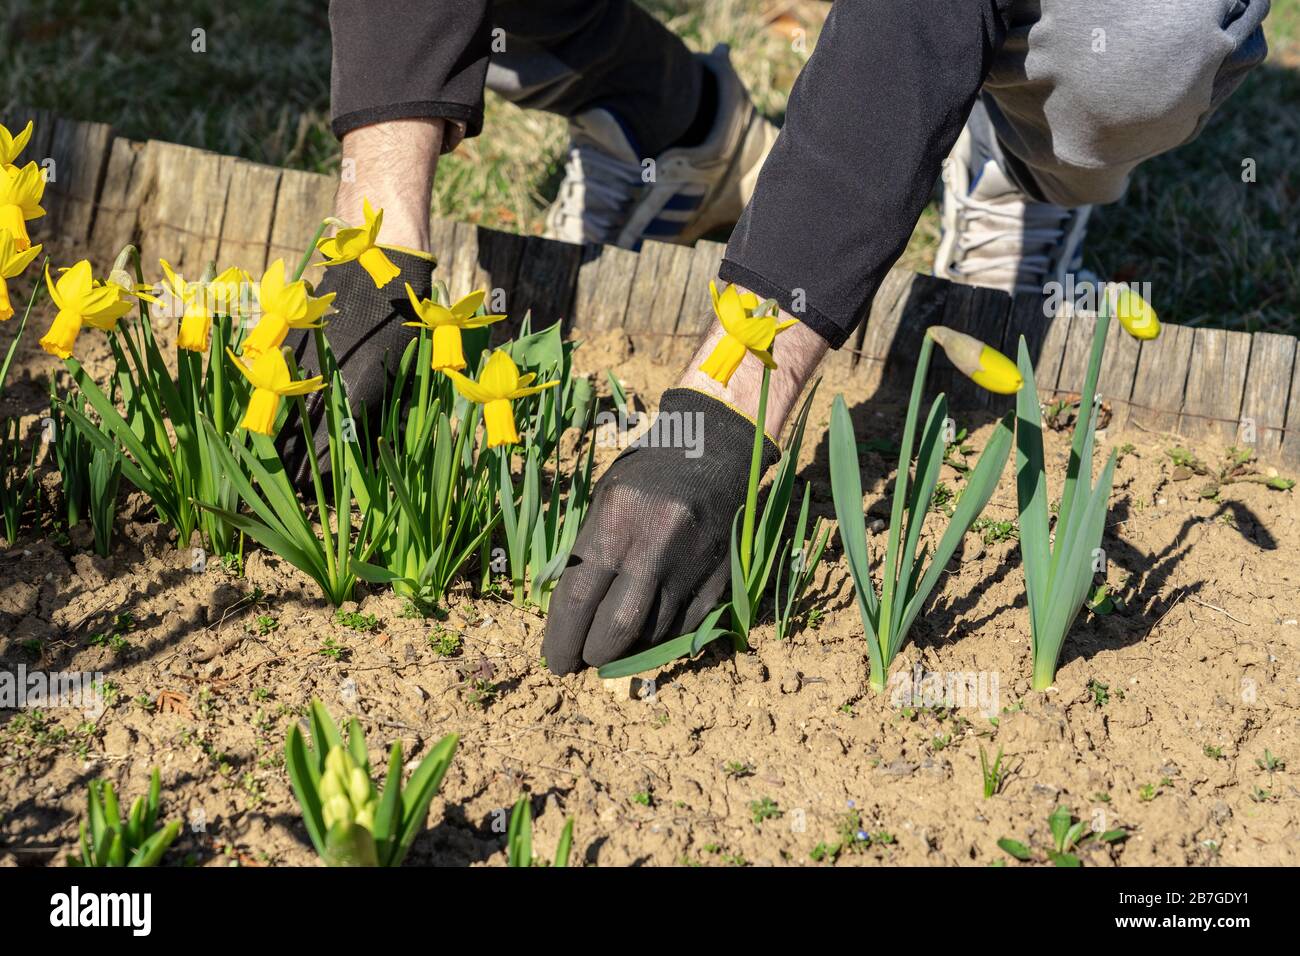 hands of man who is doing some garden care weed out round the daffodil flowers Stock Photo